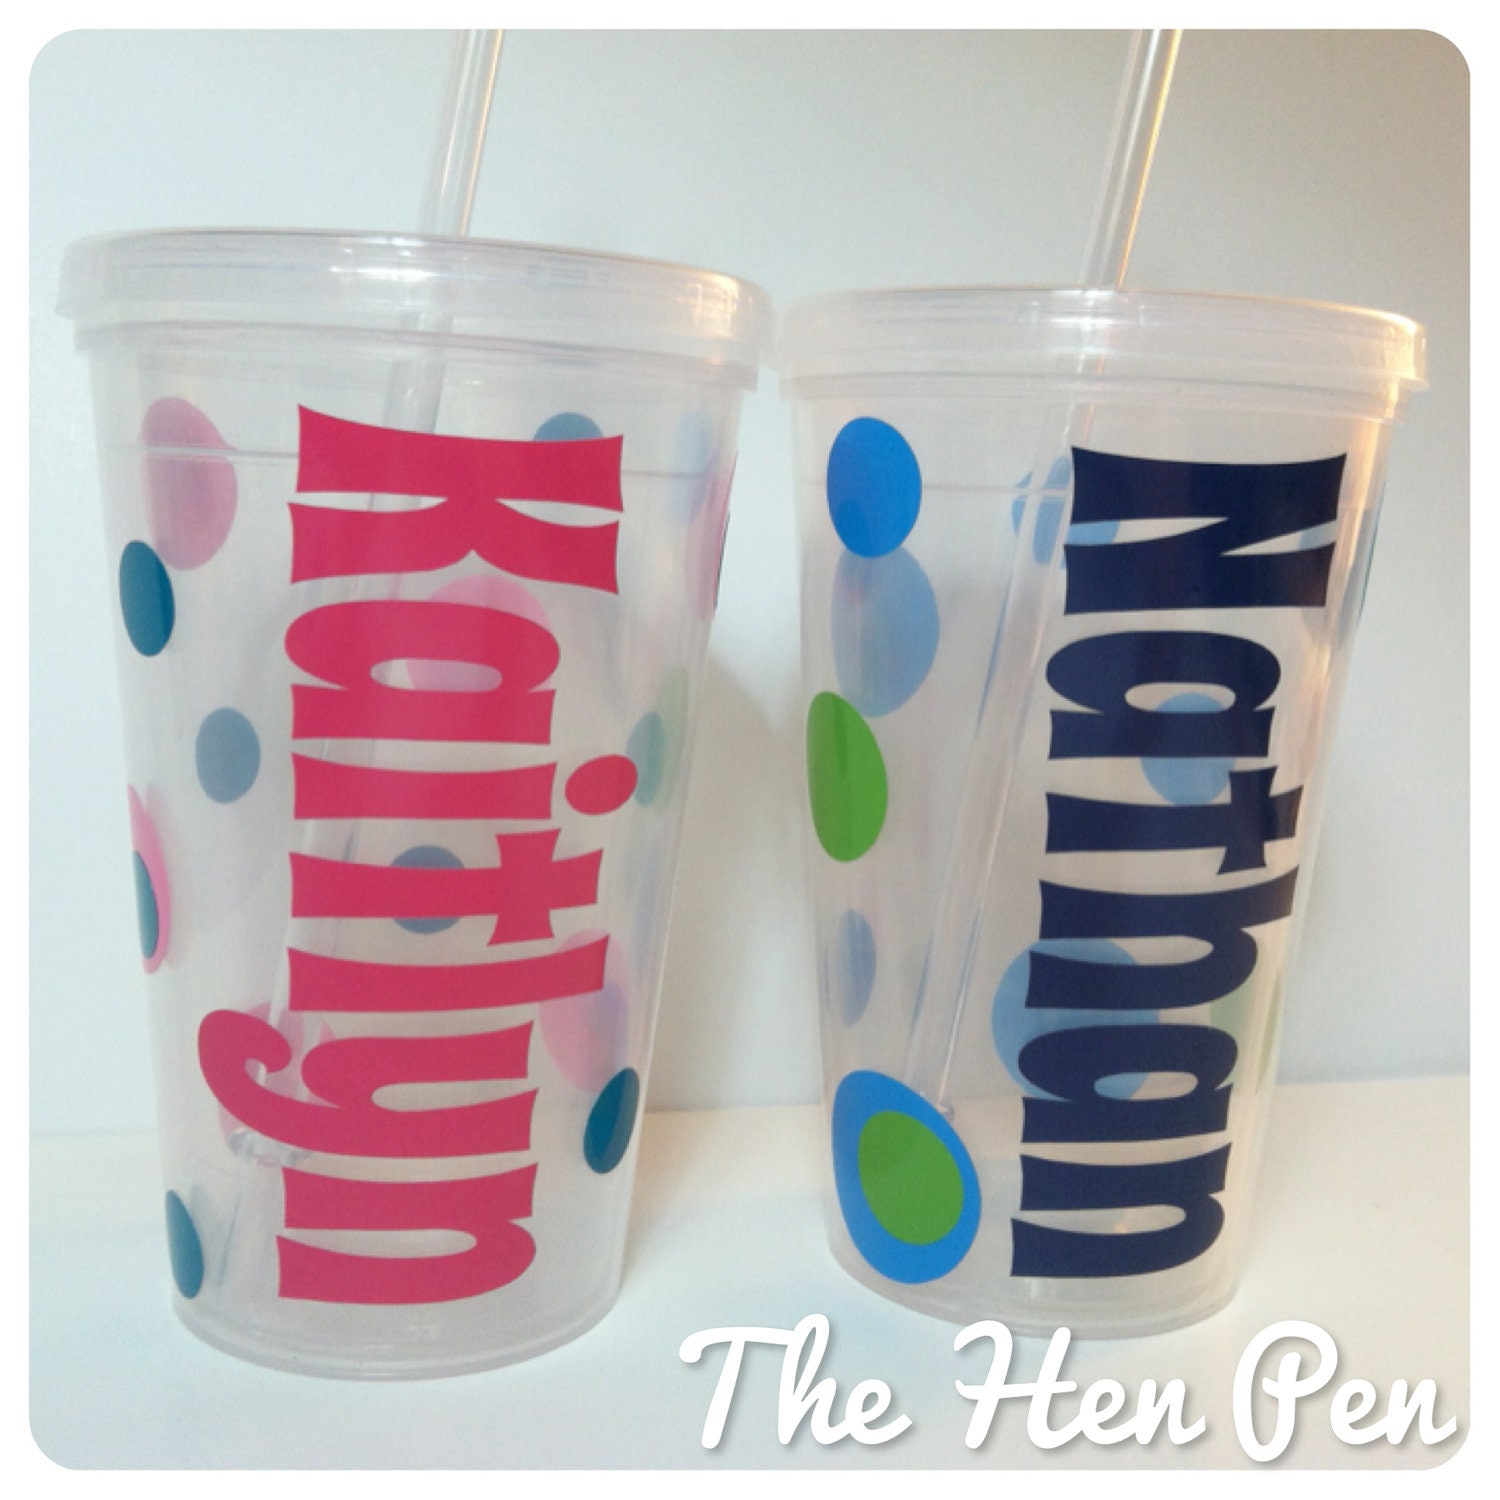 clear unbreakable tumblers TheHenPen Cups with CLEAR Kids Personalized tumblers by 16oz